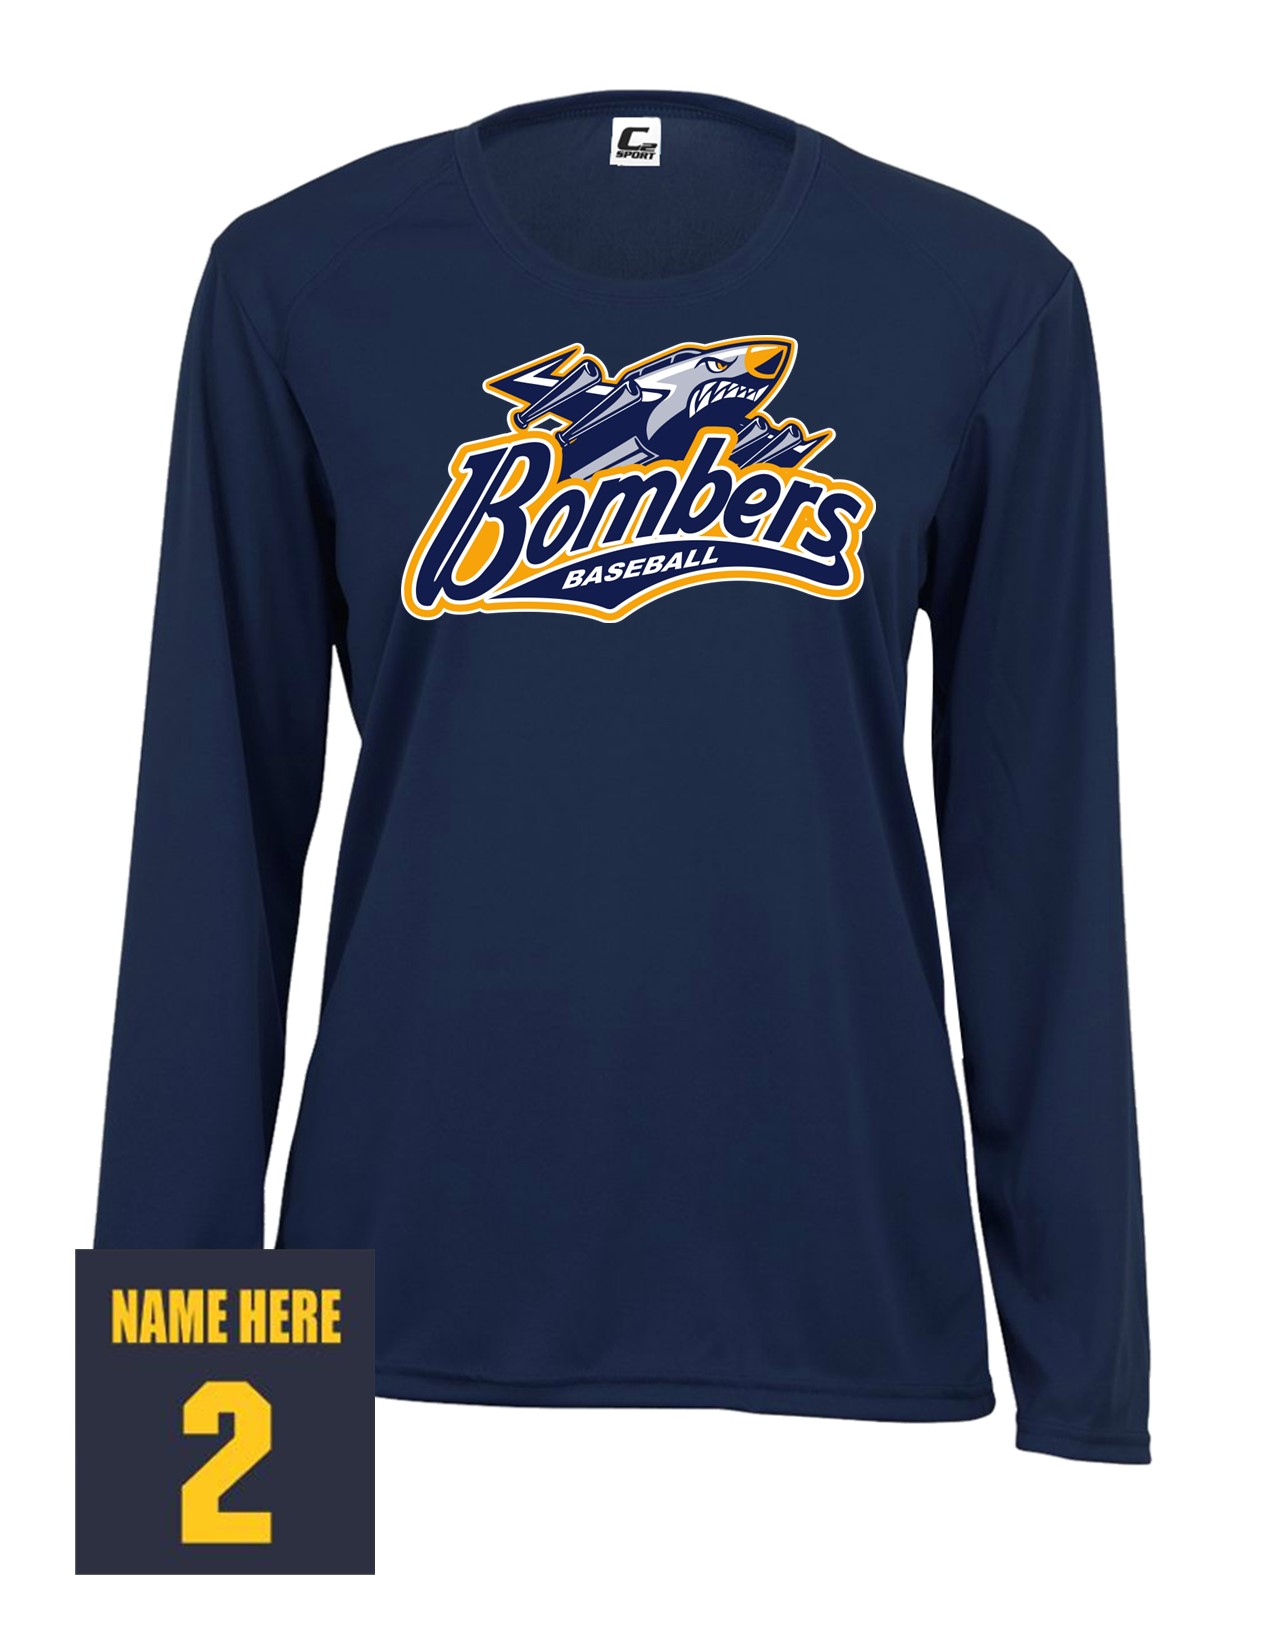 58a Badger 5604 Ladies C2 Performance 100% Poly Wicking Long Sleeve T-Shirt with Bombers Plane Logo